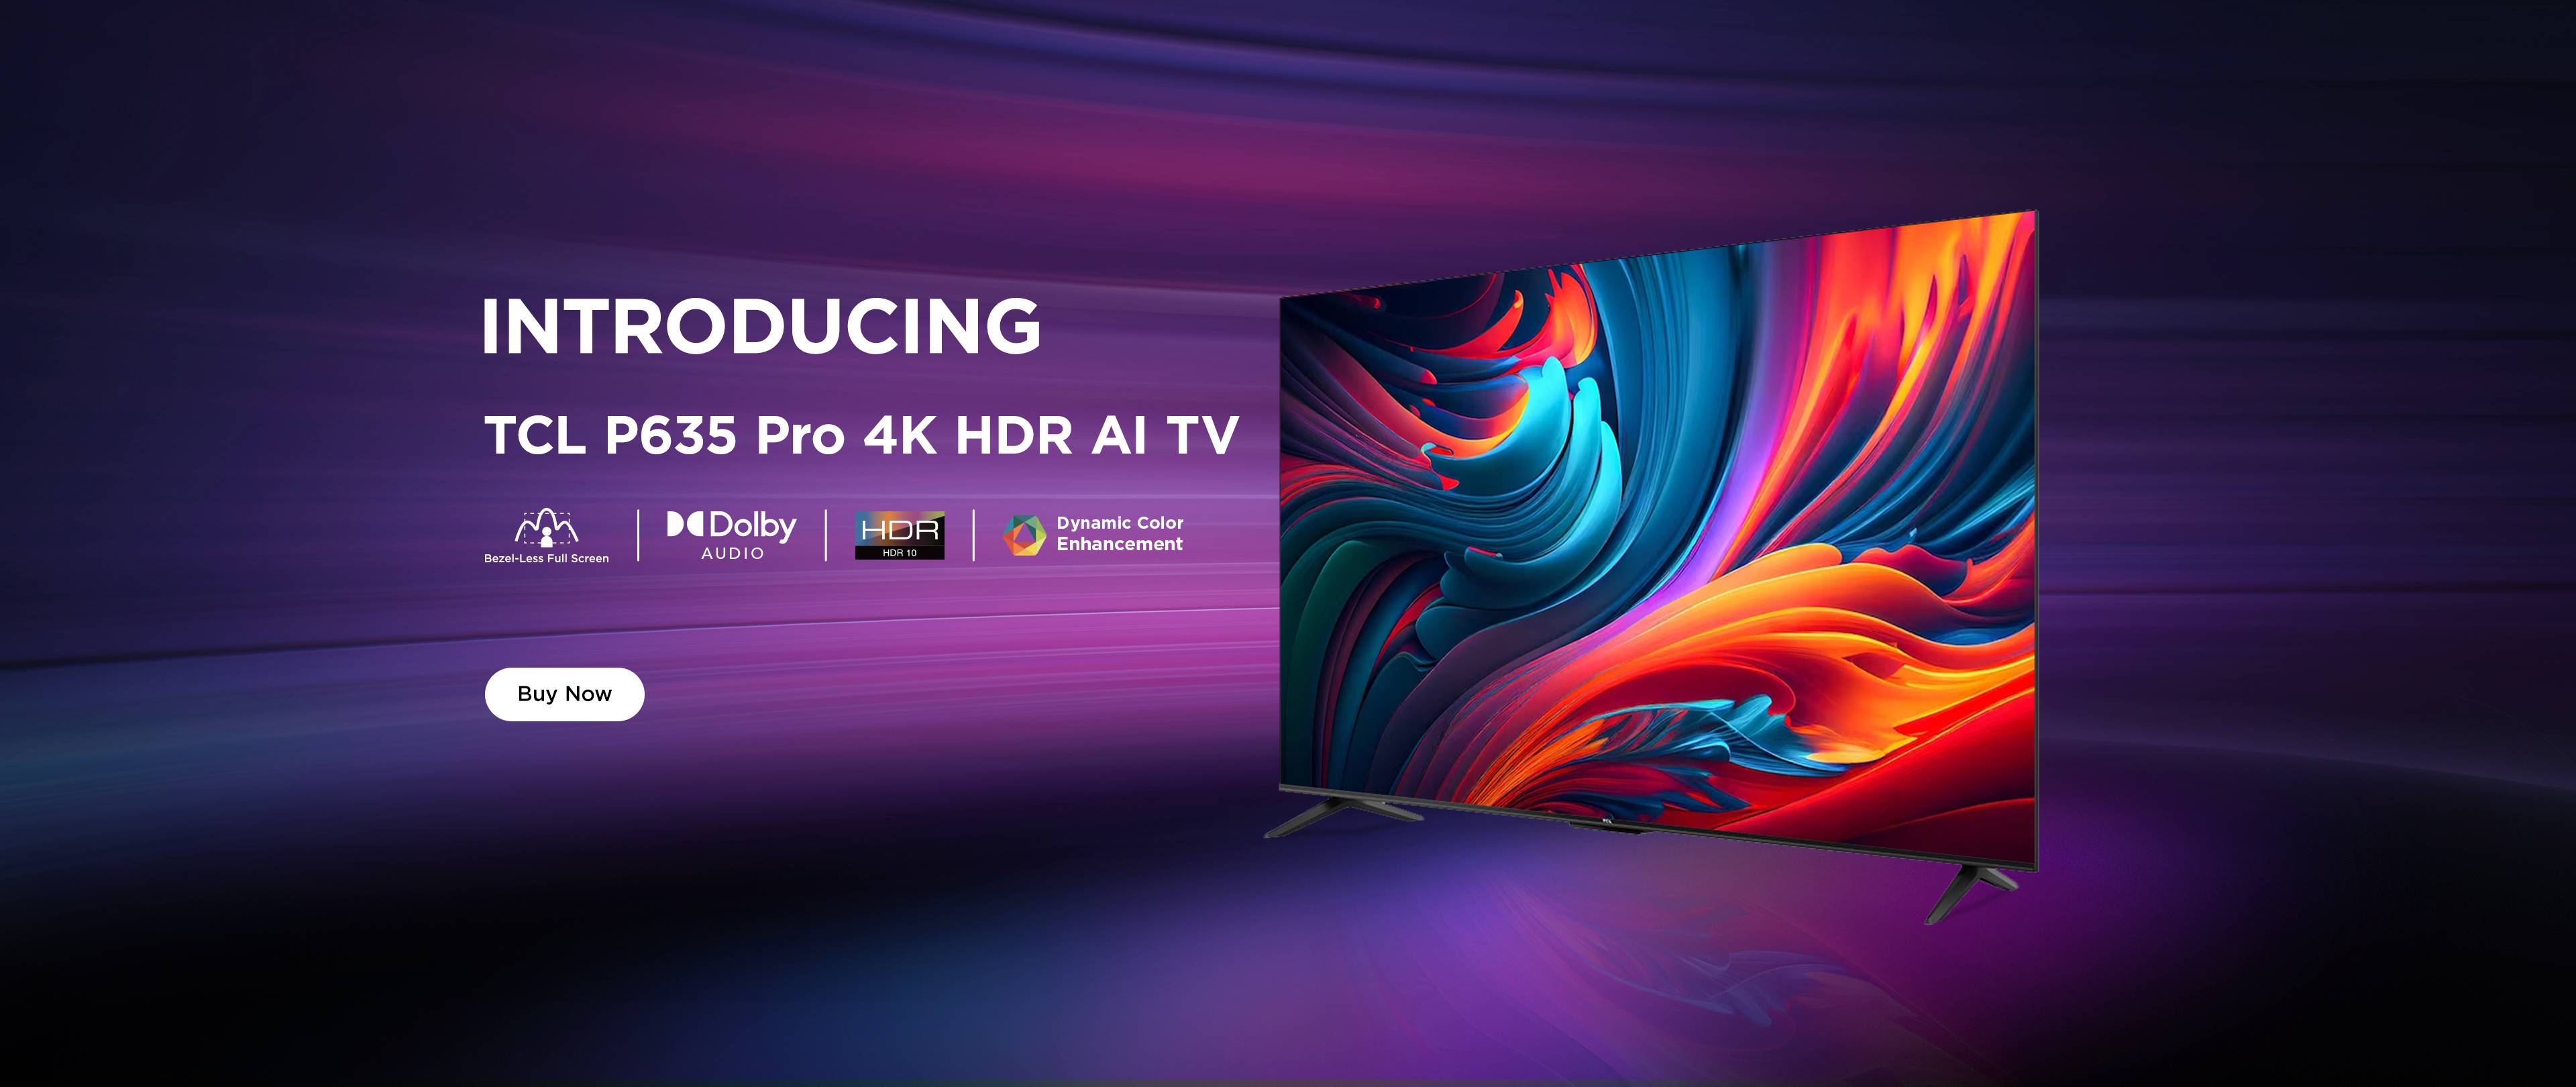 TCL P635 Pro Launches